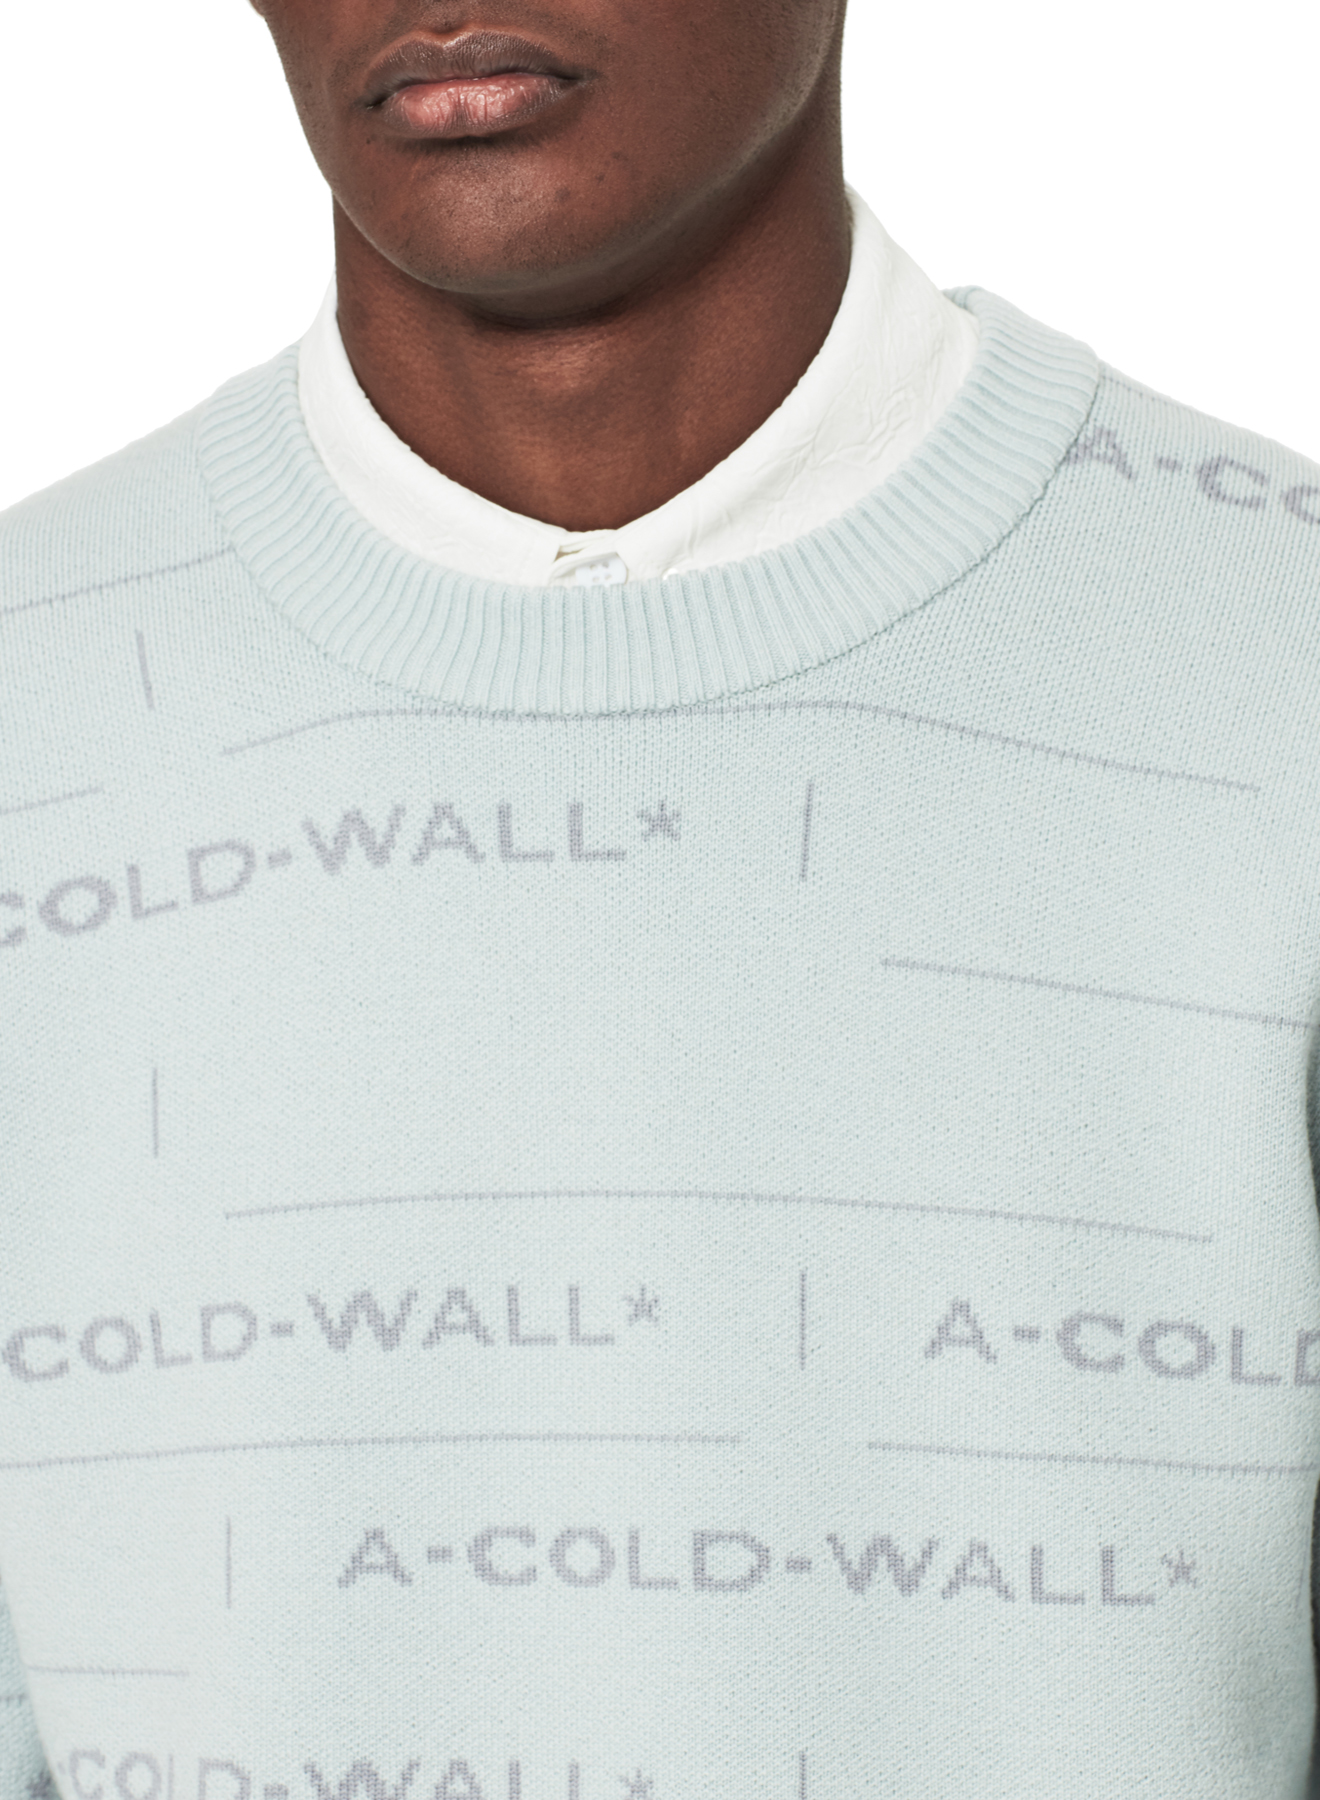 Karlmond A-COLD-WALL* AW21 B2B+E-COMMERCE